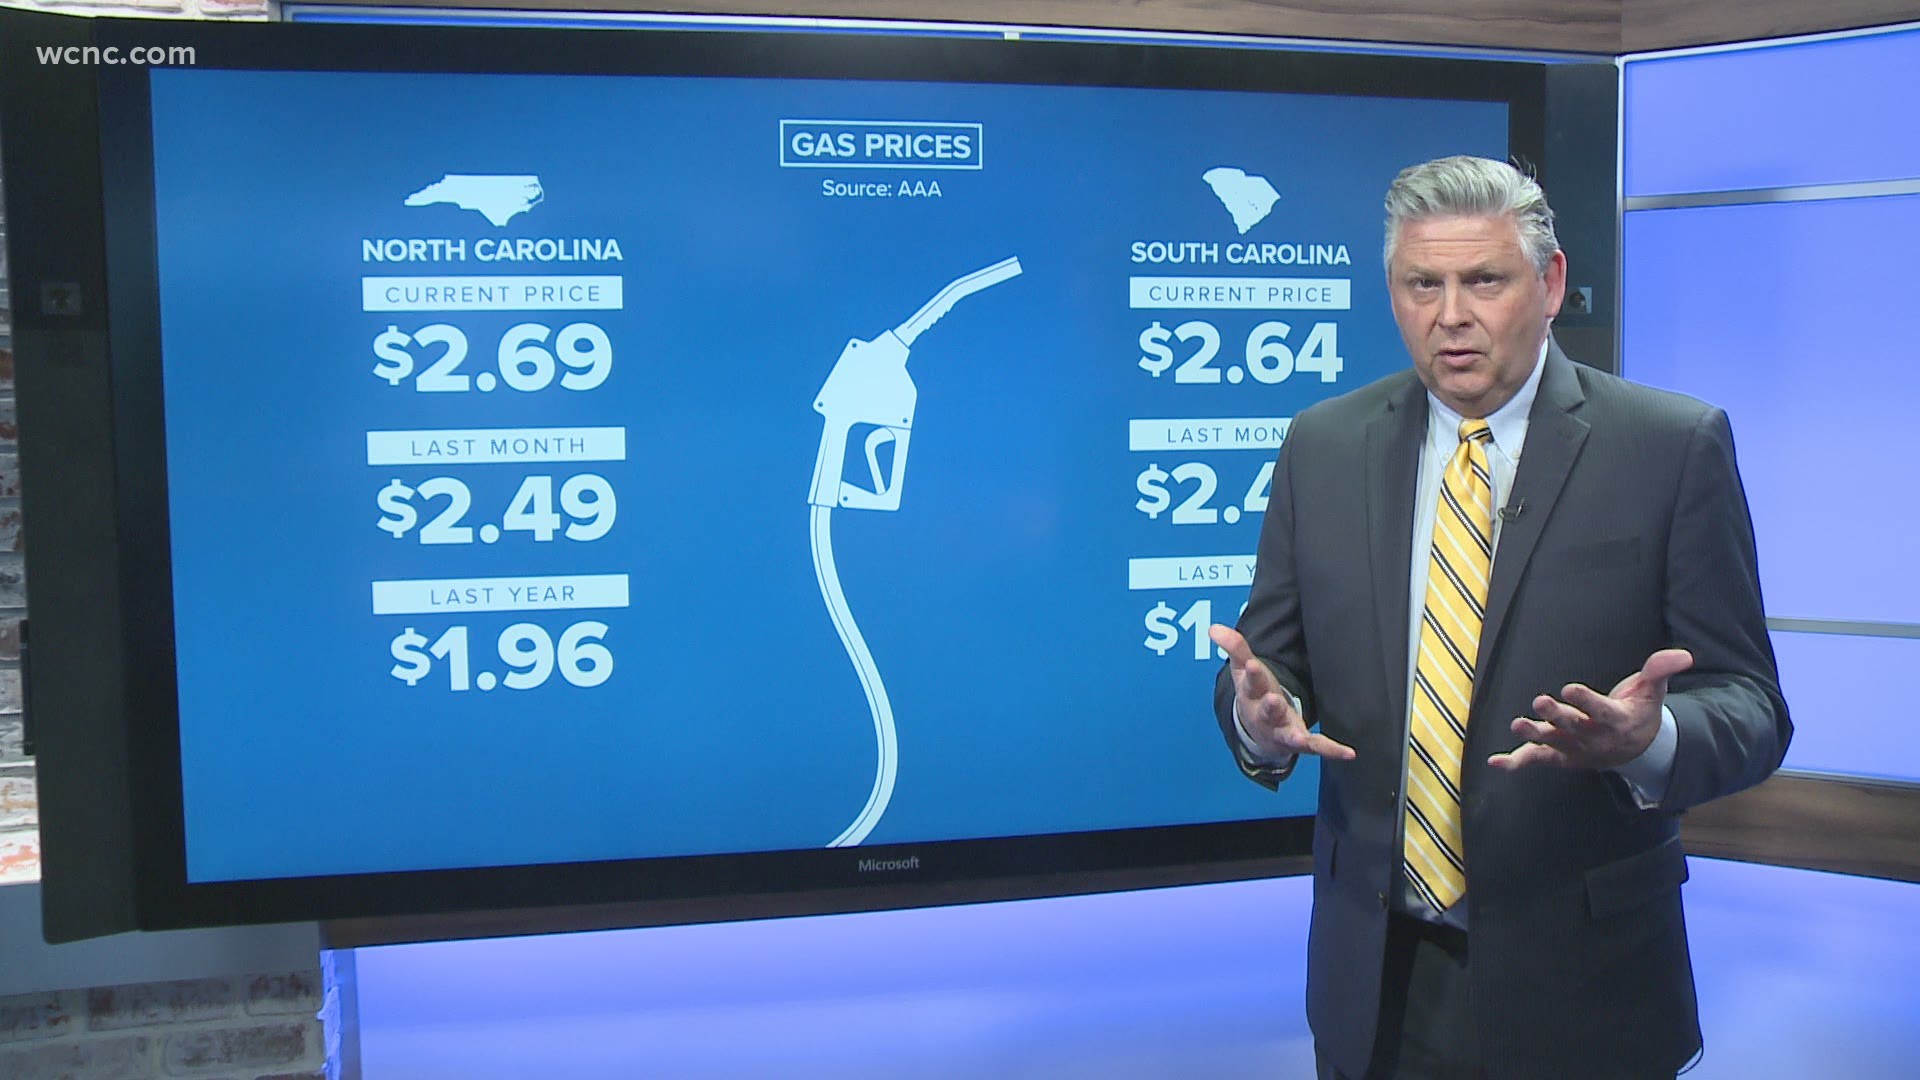 Last year, gas prices in North Carolina were $1.96 a gallon. Now they are at $2.69.